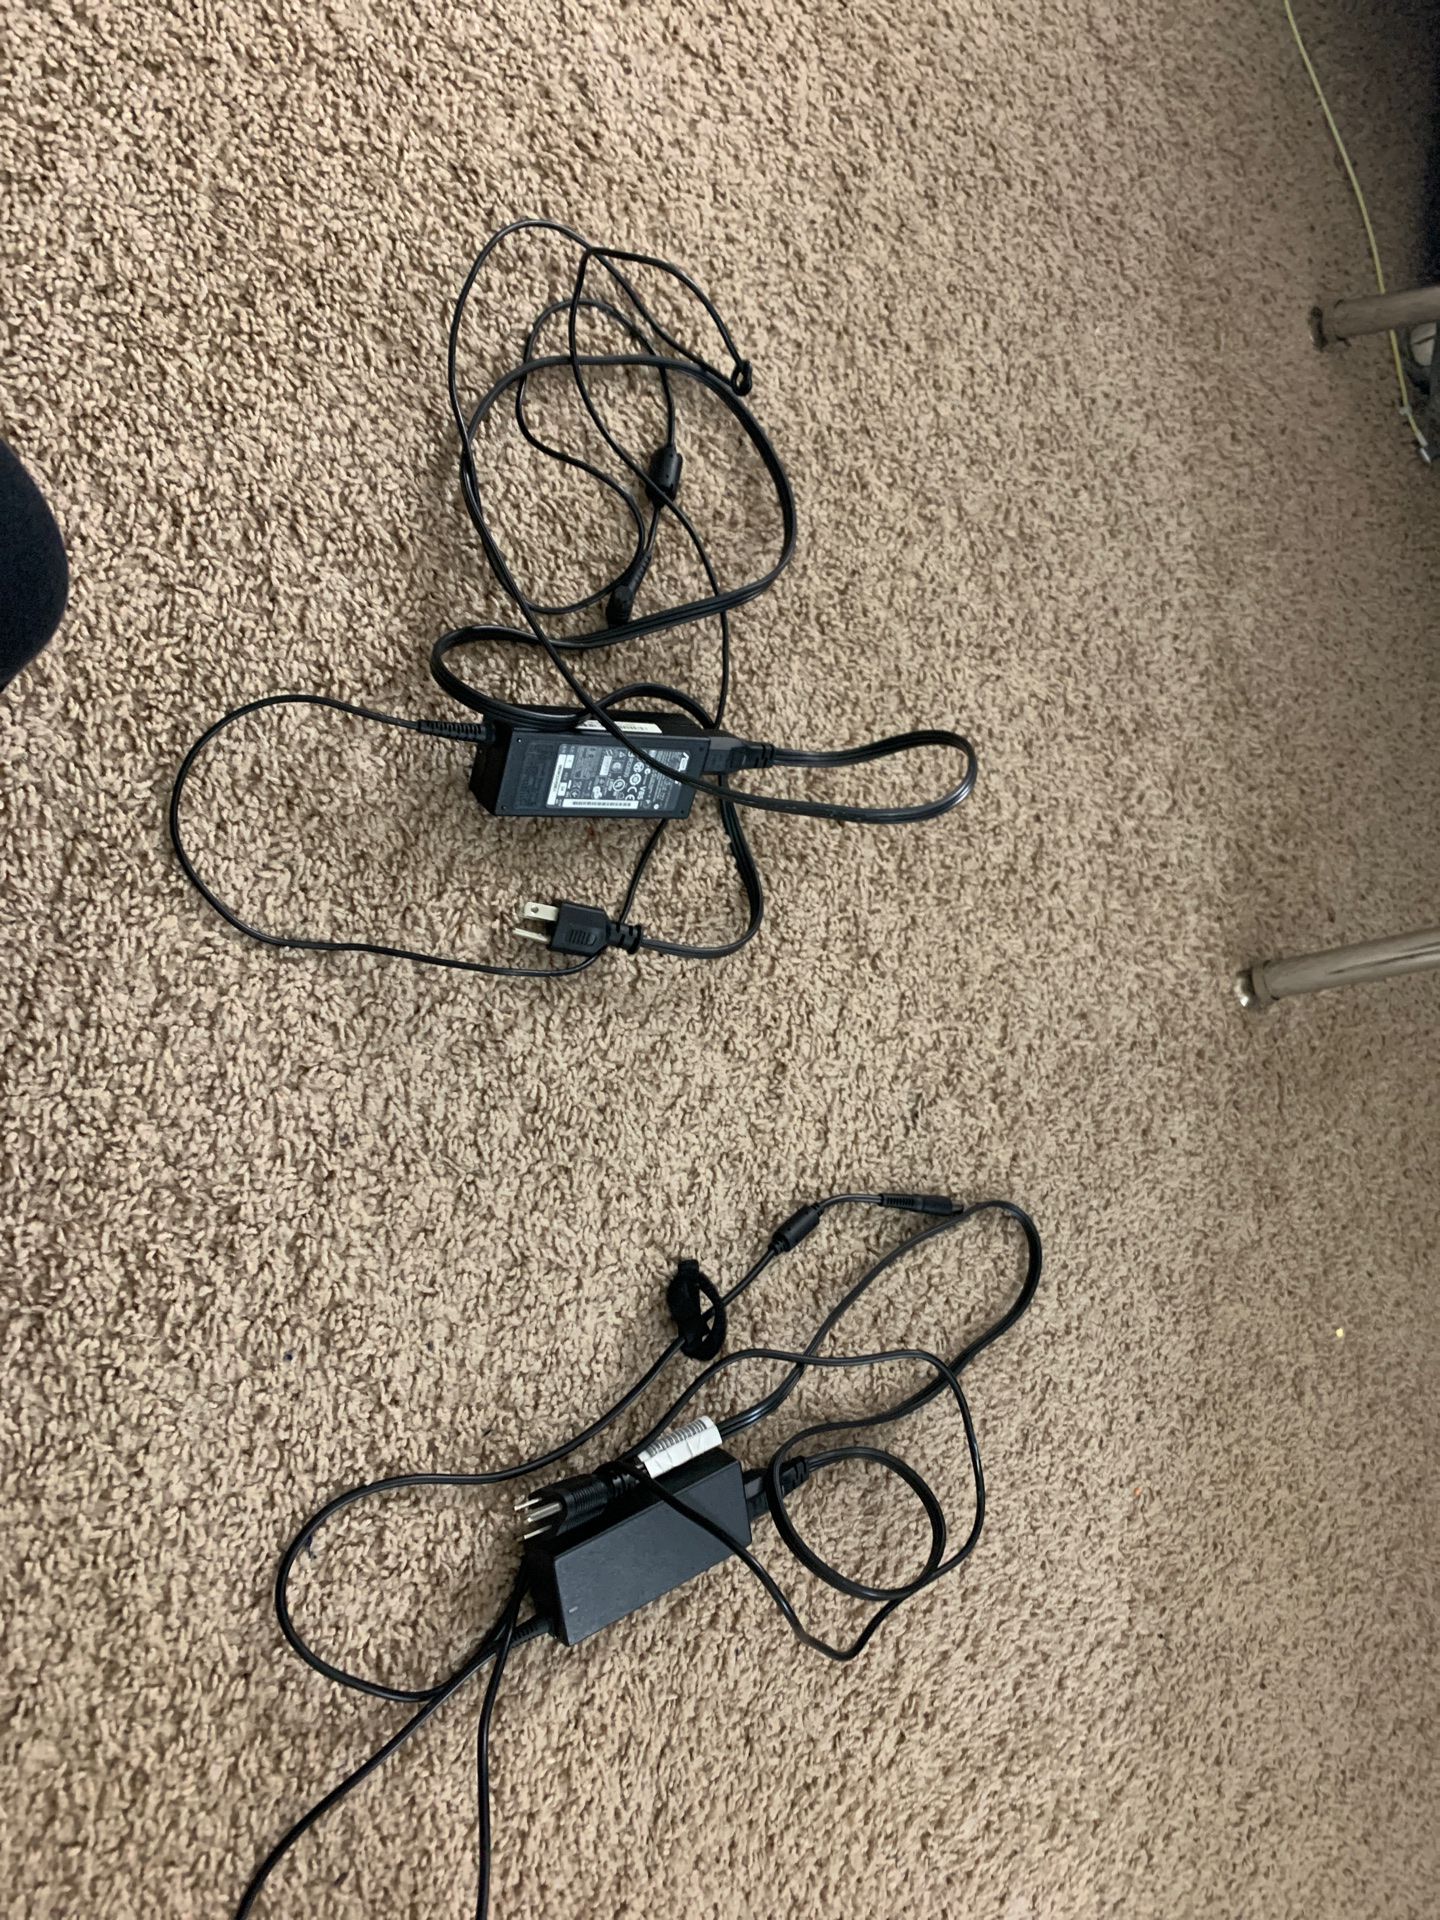 1 Asus+1 Dell Laptop Chargers